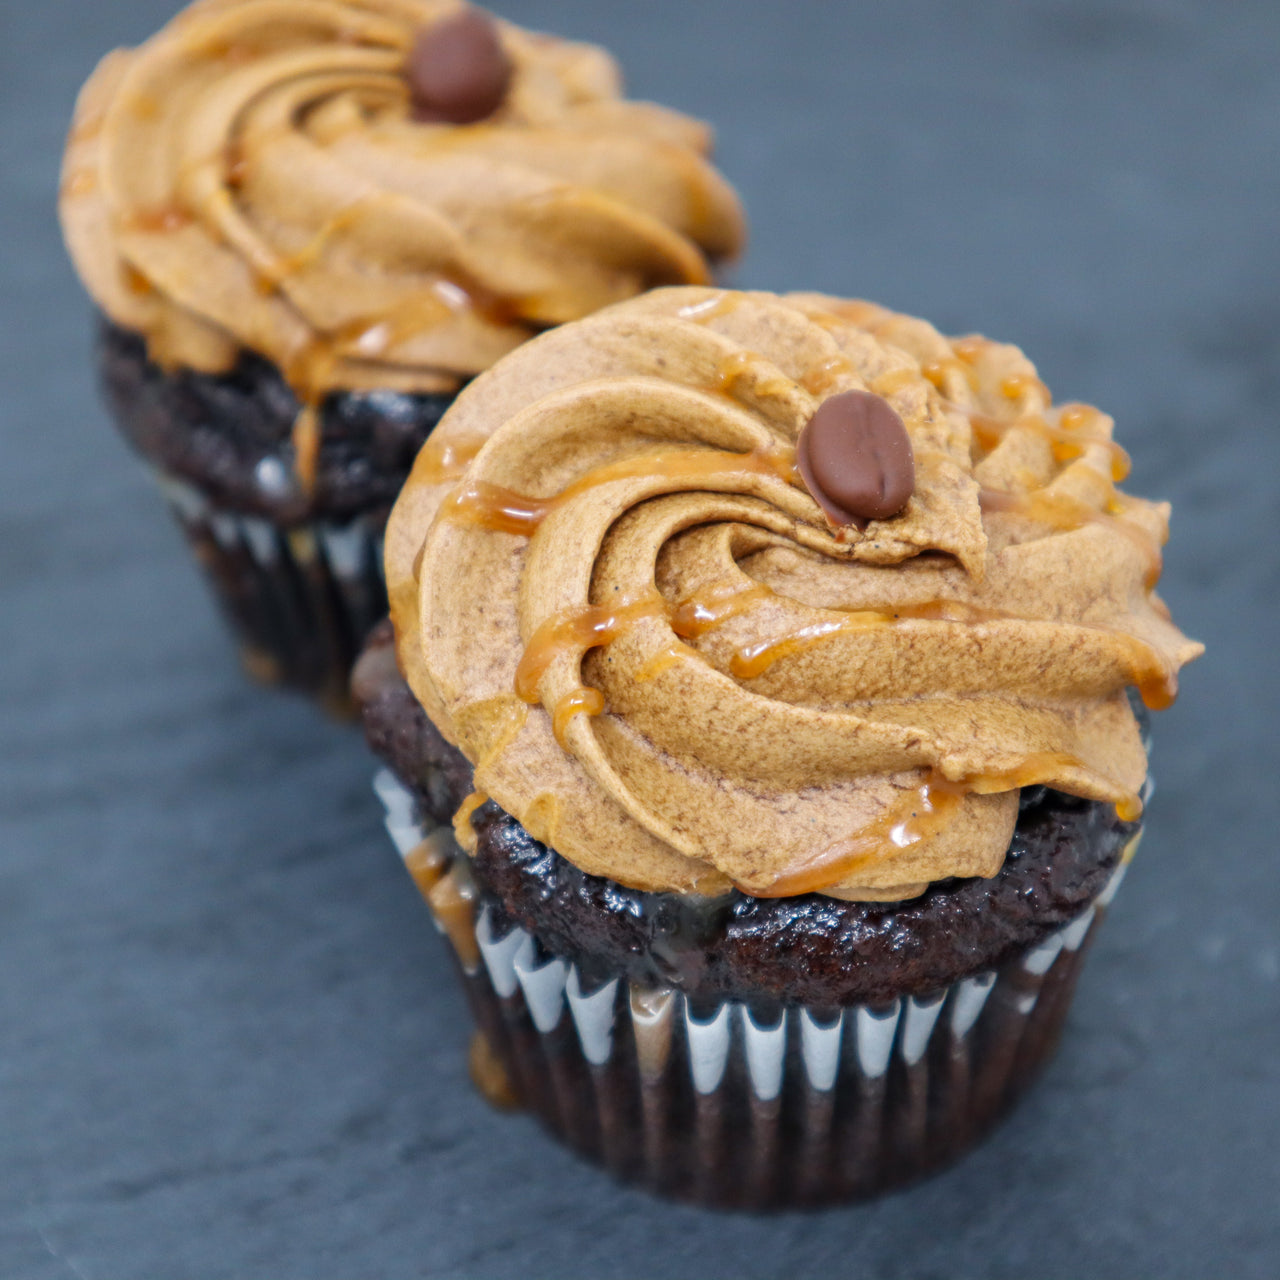 SALTED CARAMEL MOCHA CUPCAKES: SOLD IN QUANTITIES OF 6